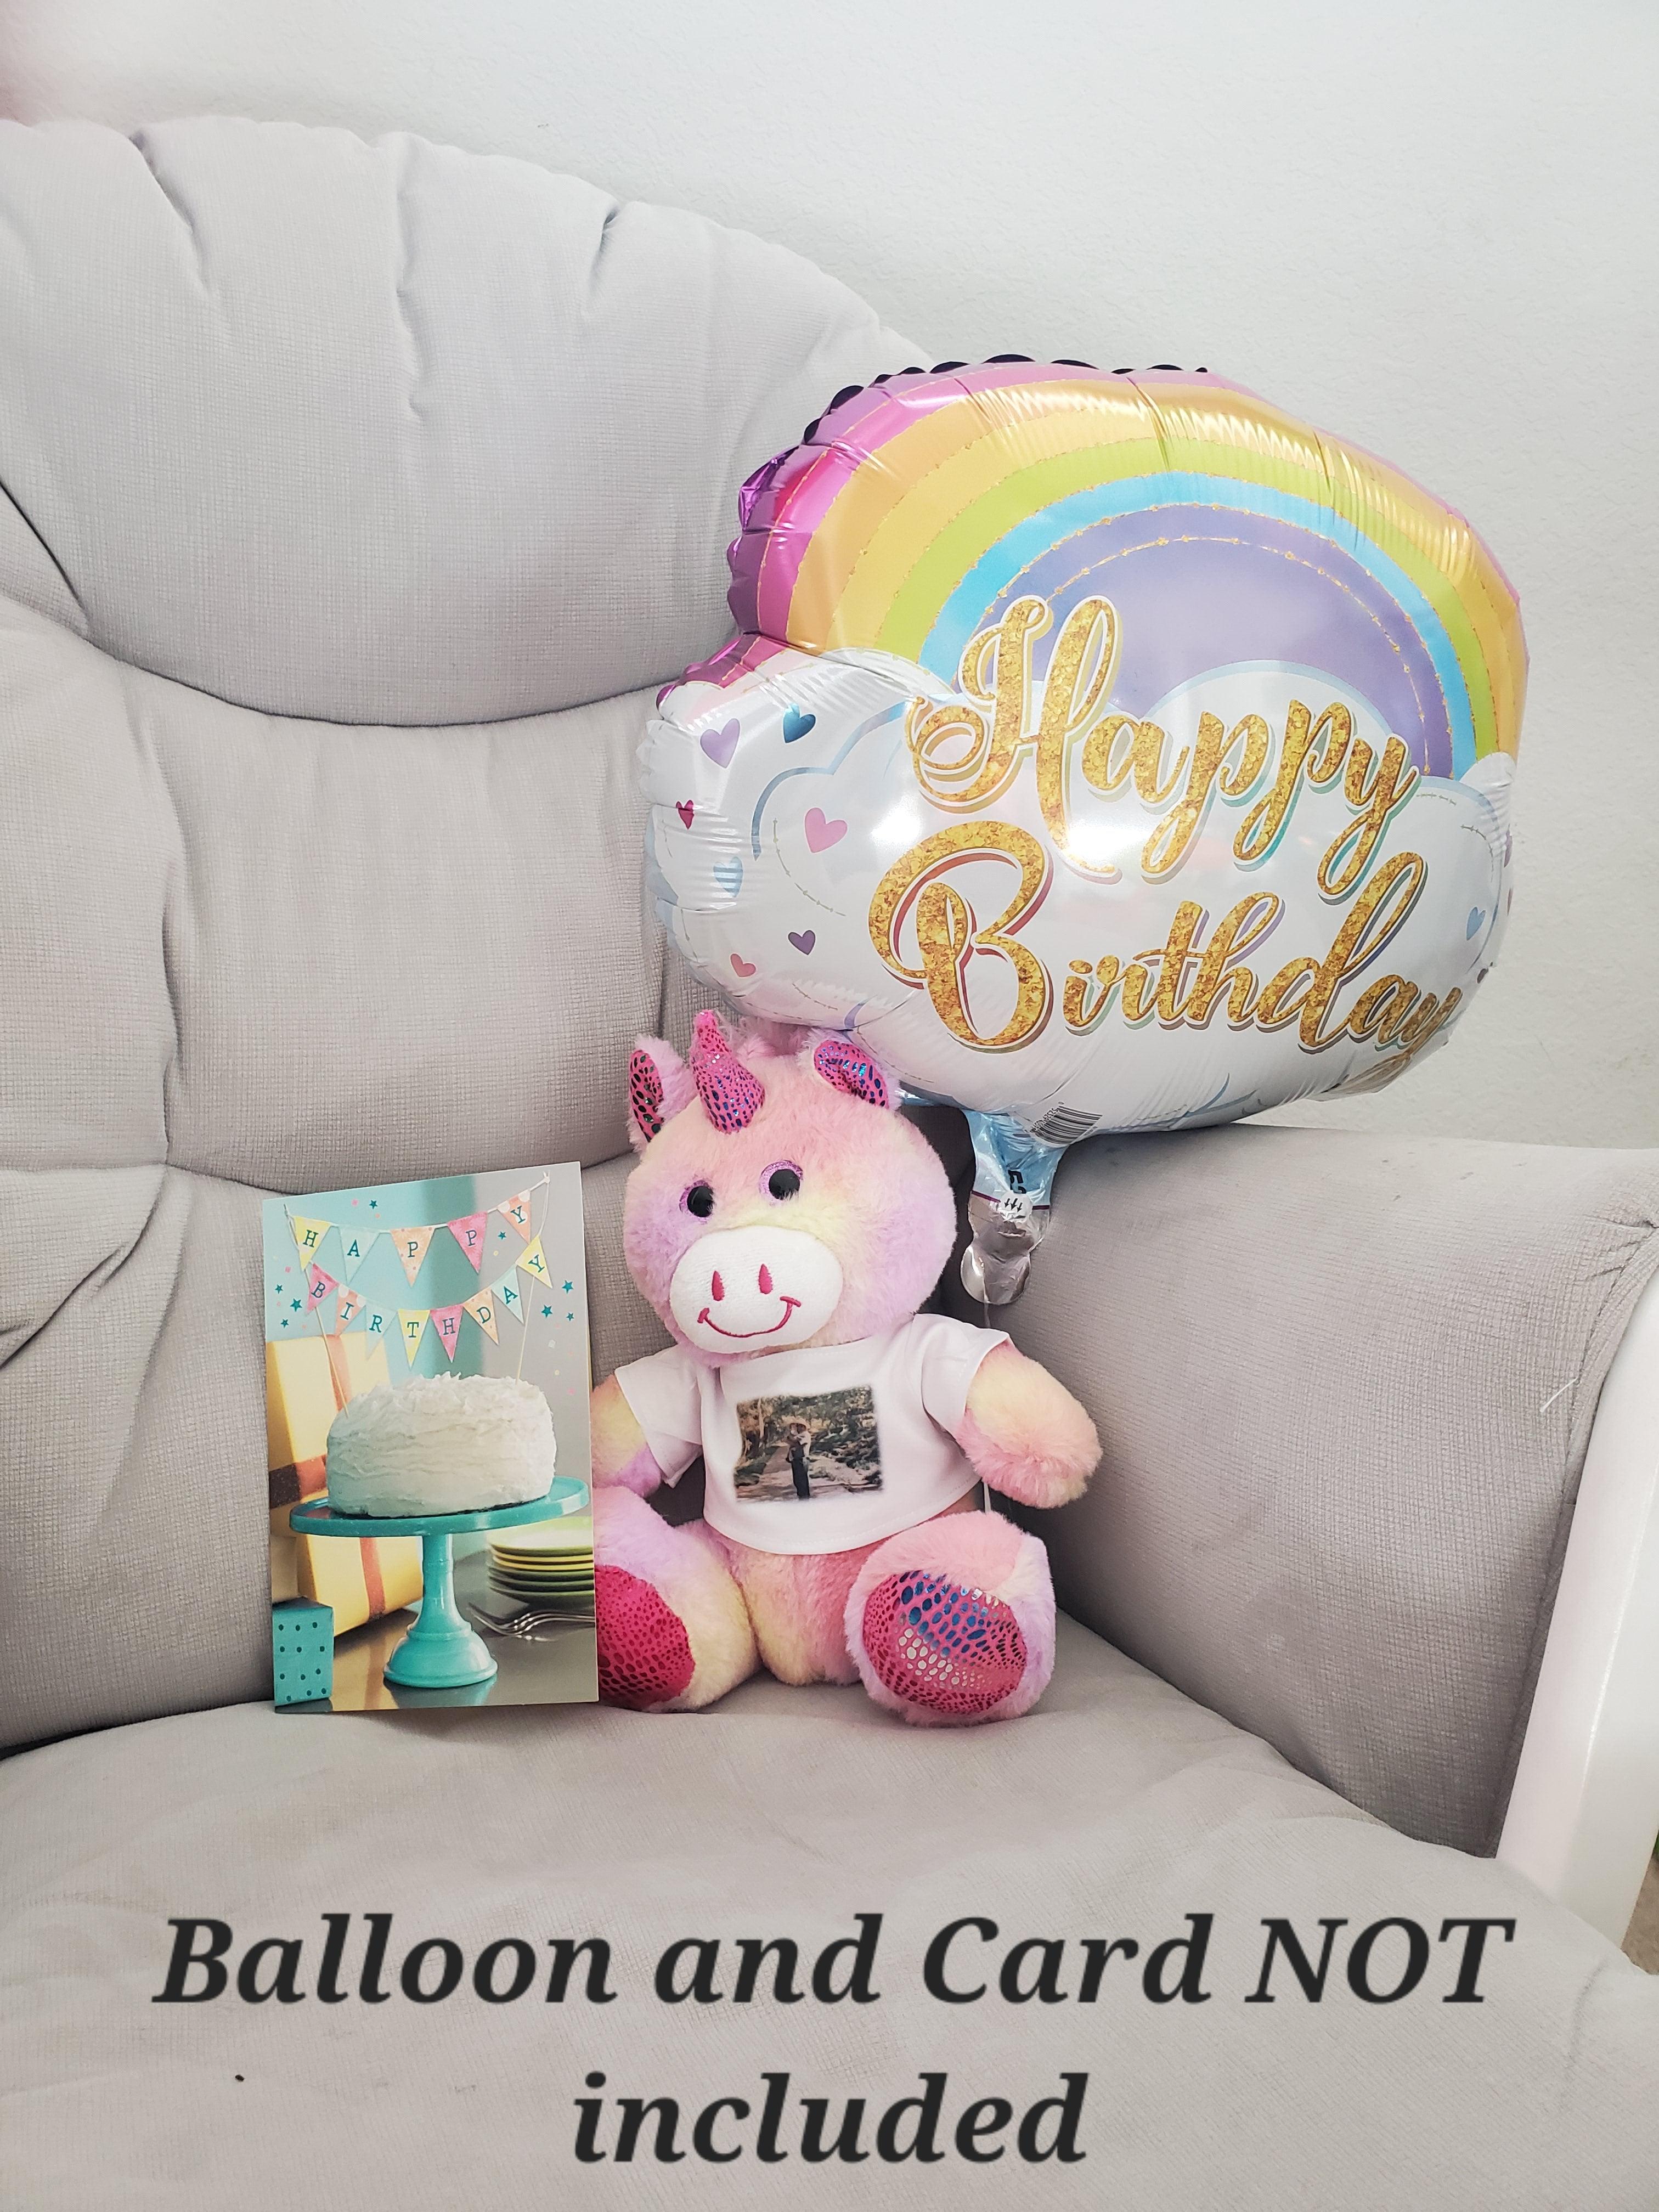 Gifts for Girls, Personalized Teddy Bear or Unicorn, Dad In Heaven Gift, Custom Plus, Custom Plushies, Custom Teddy Bear, Personalized Plushie, Custom Plush Doll, Unicorn Plush, Custom Unicorn Plush, Cute Unique Plush, Girls birthday Party Favors, Birthday Gift for Girls, Gift for child with Sensory Needs and or Autism , Gift for 5 year old Girls | Gift for Girls | Gift for 2 3 4 5 6 year old girls, , Personalized Girls Unicorn Birthday Party